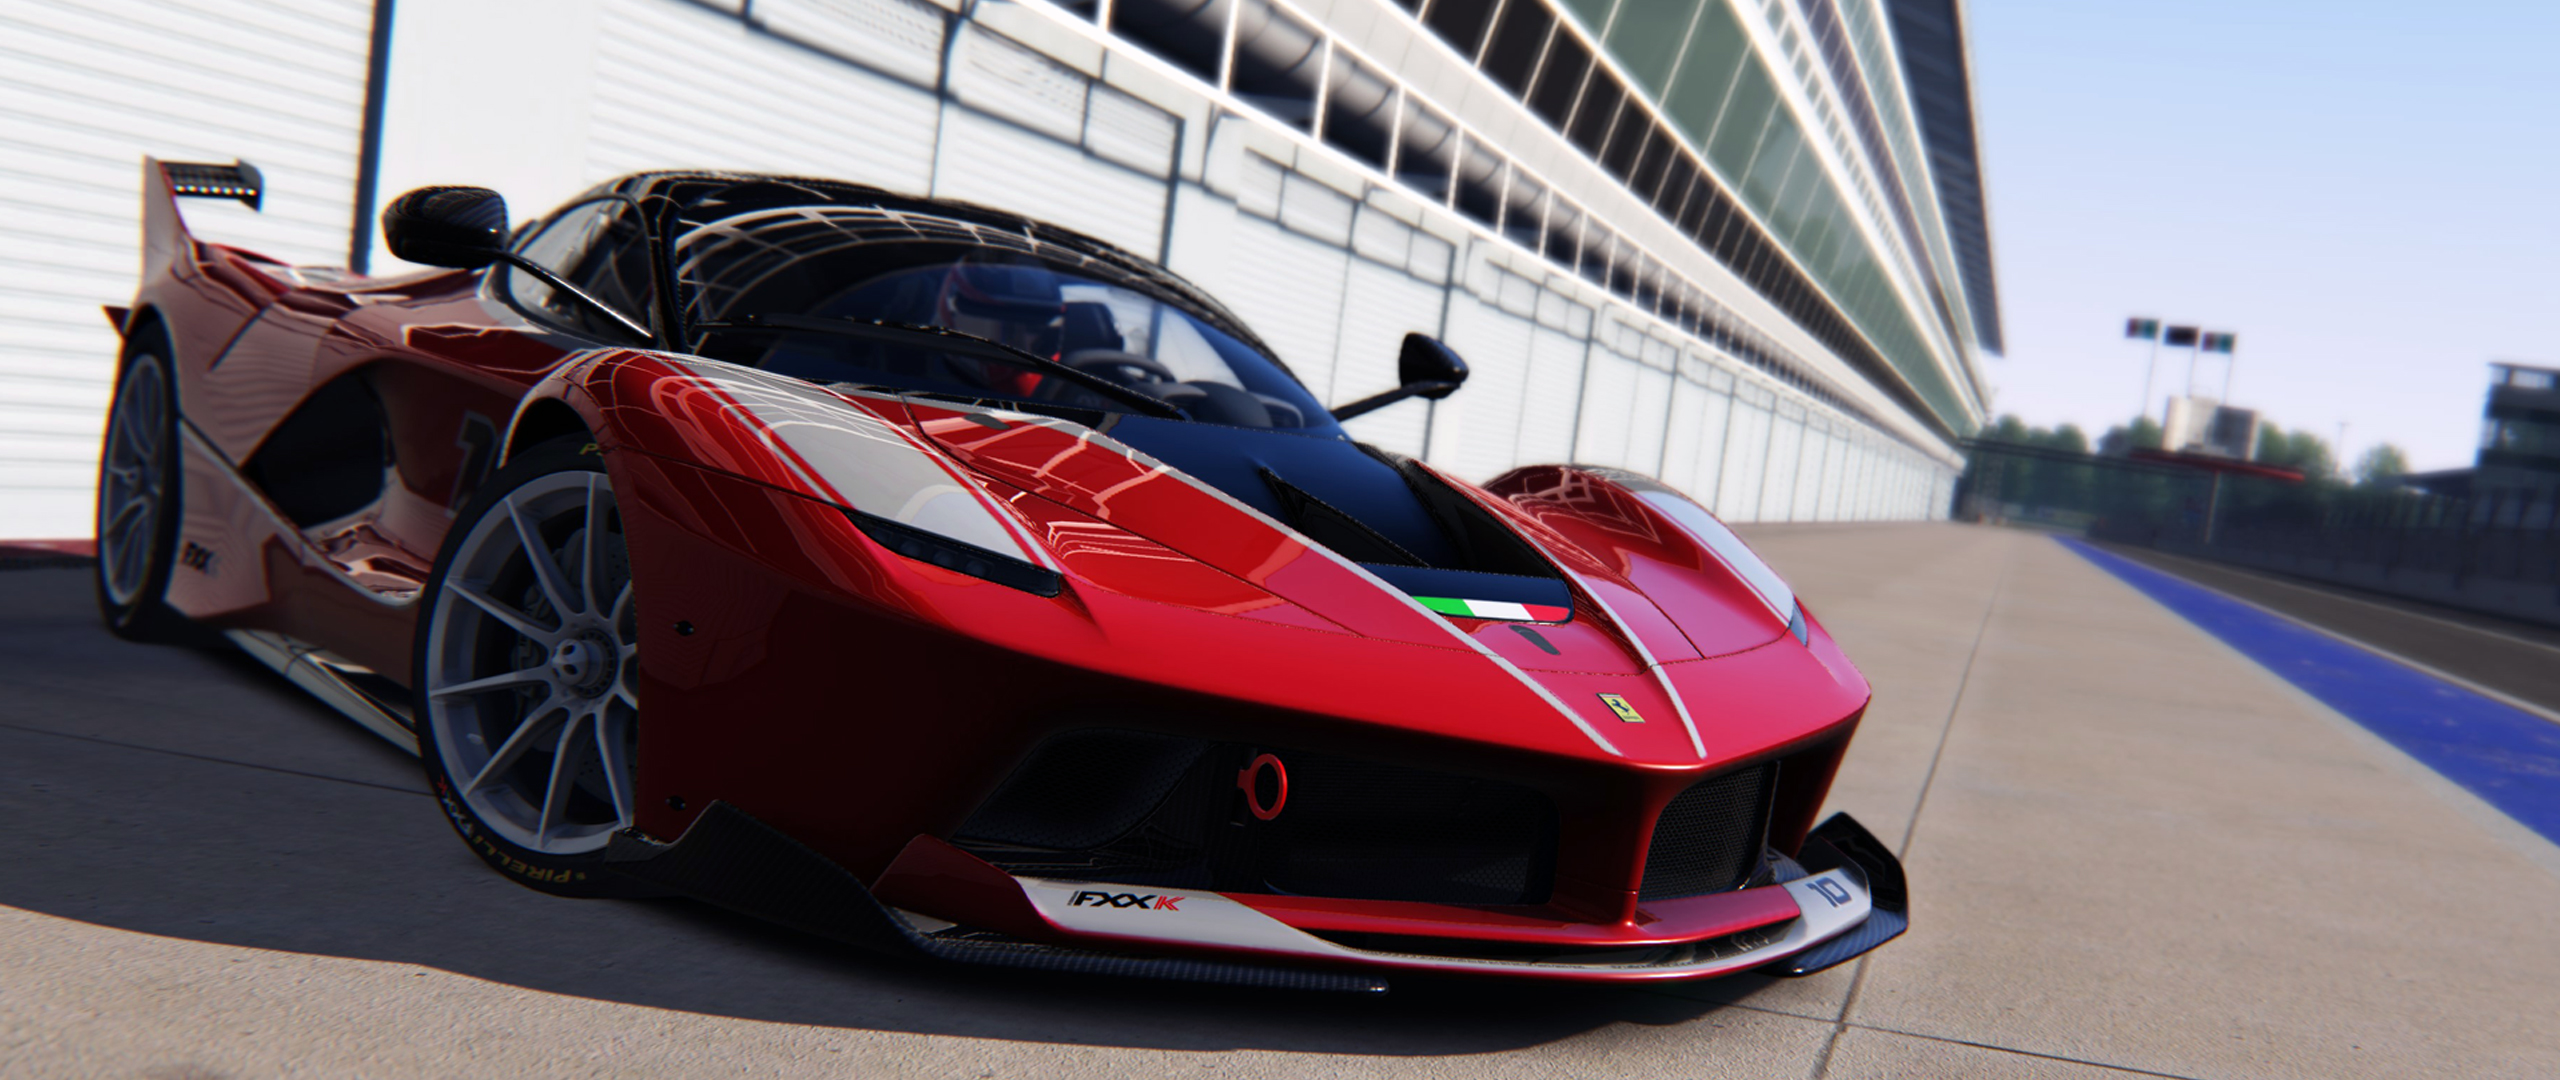 Assetto Corsa Are Ps4 And Xbox One Ready For A True Driving